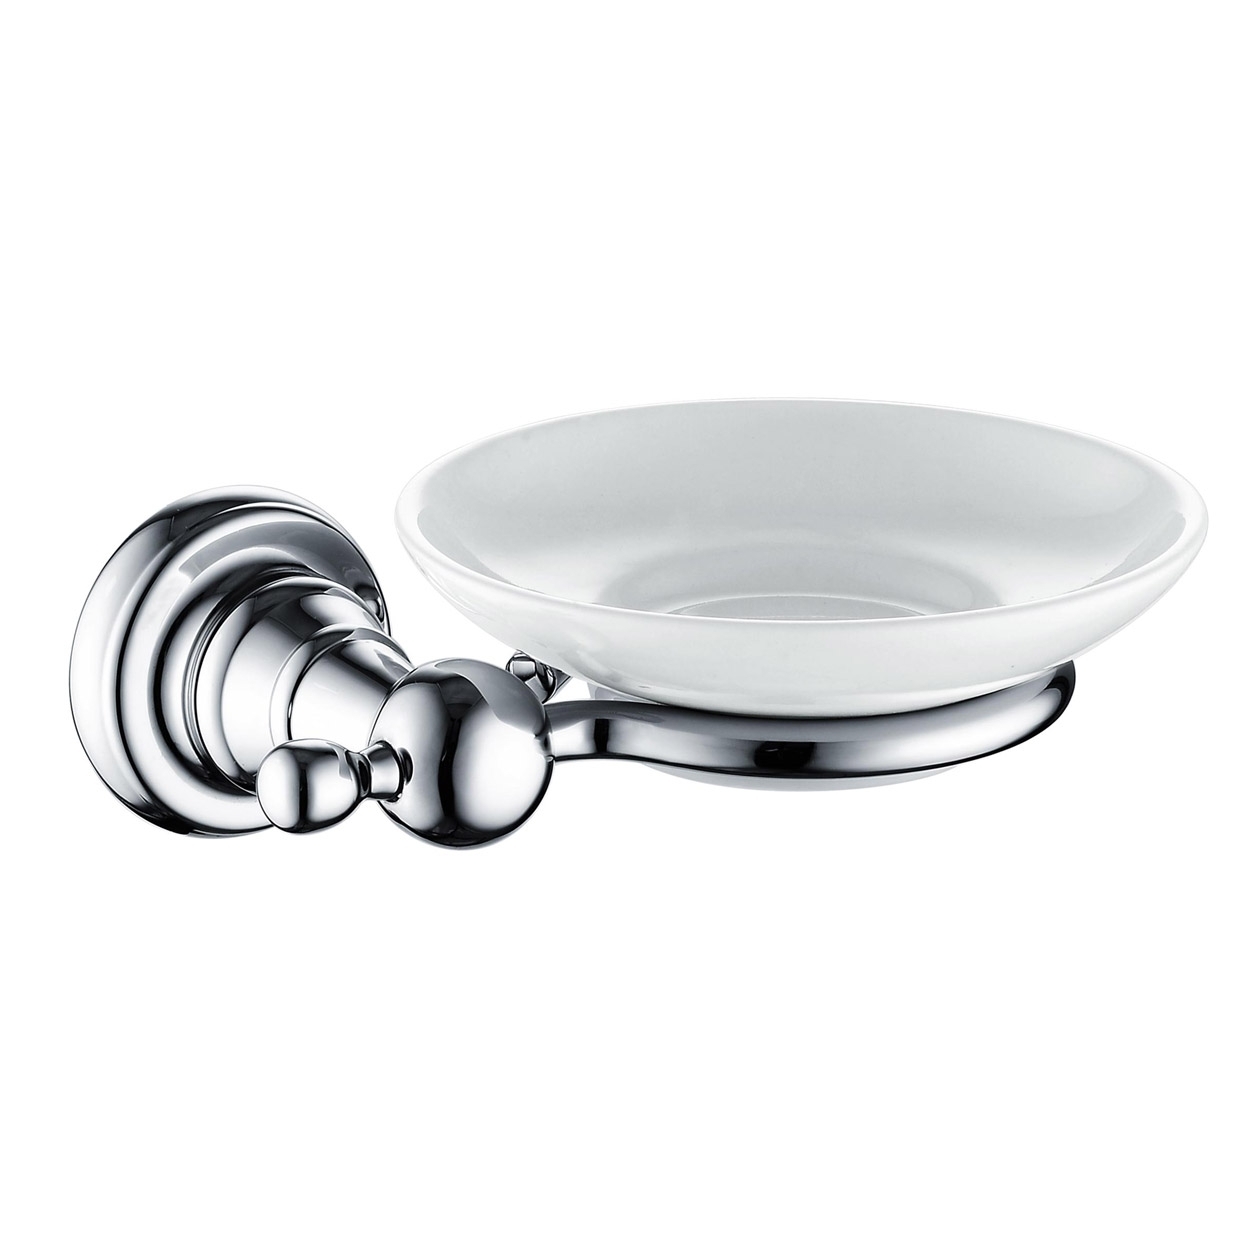 Bristan 1901 Traditional Brass Soap Dish - Chrome Plated - N2 DISH C 